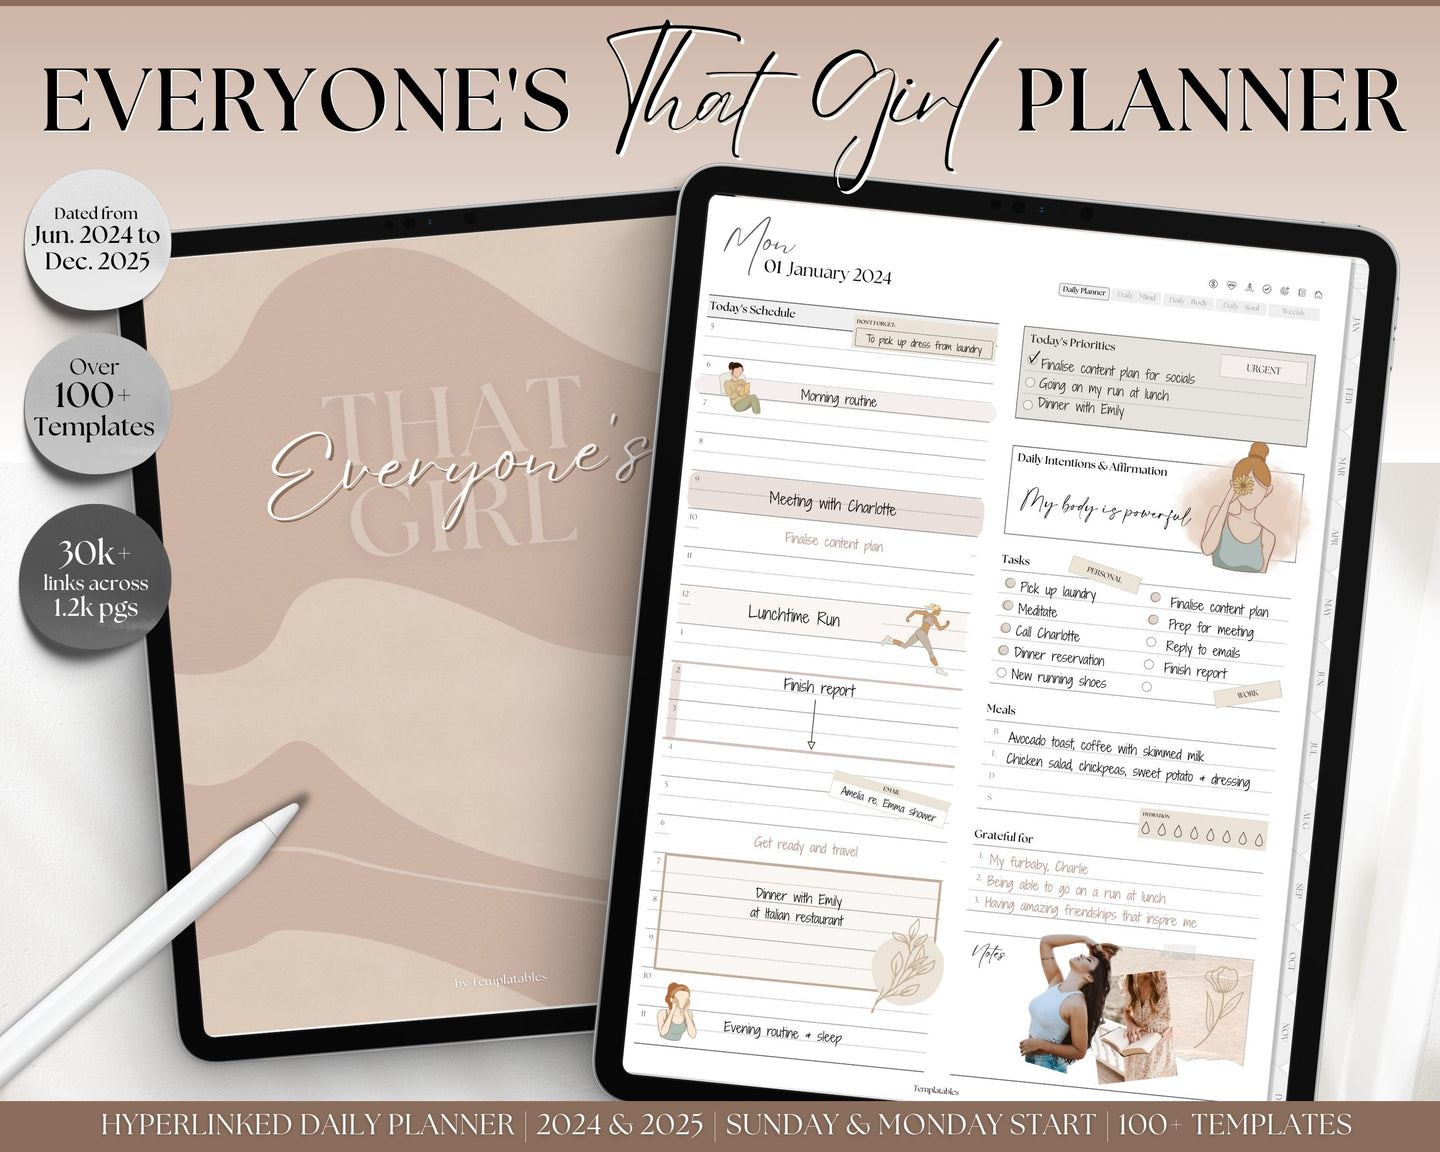 EVERYONES THAT GIRL Digital Planner | 2024 Daily, Weekly, Monthly Planner for iPad and Goodnotes, That Girl Aesthetic, Undated, 2024-2025